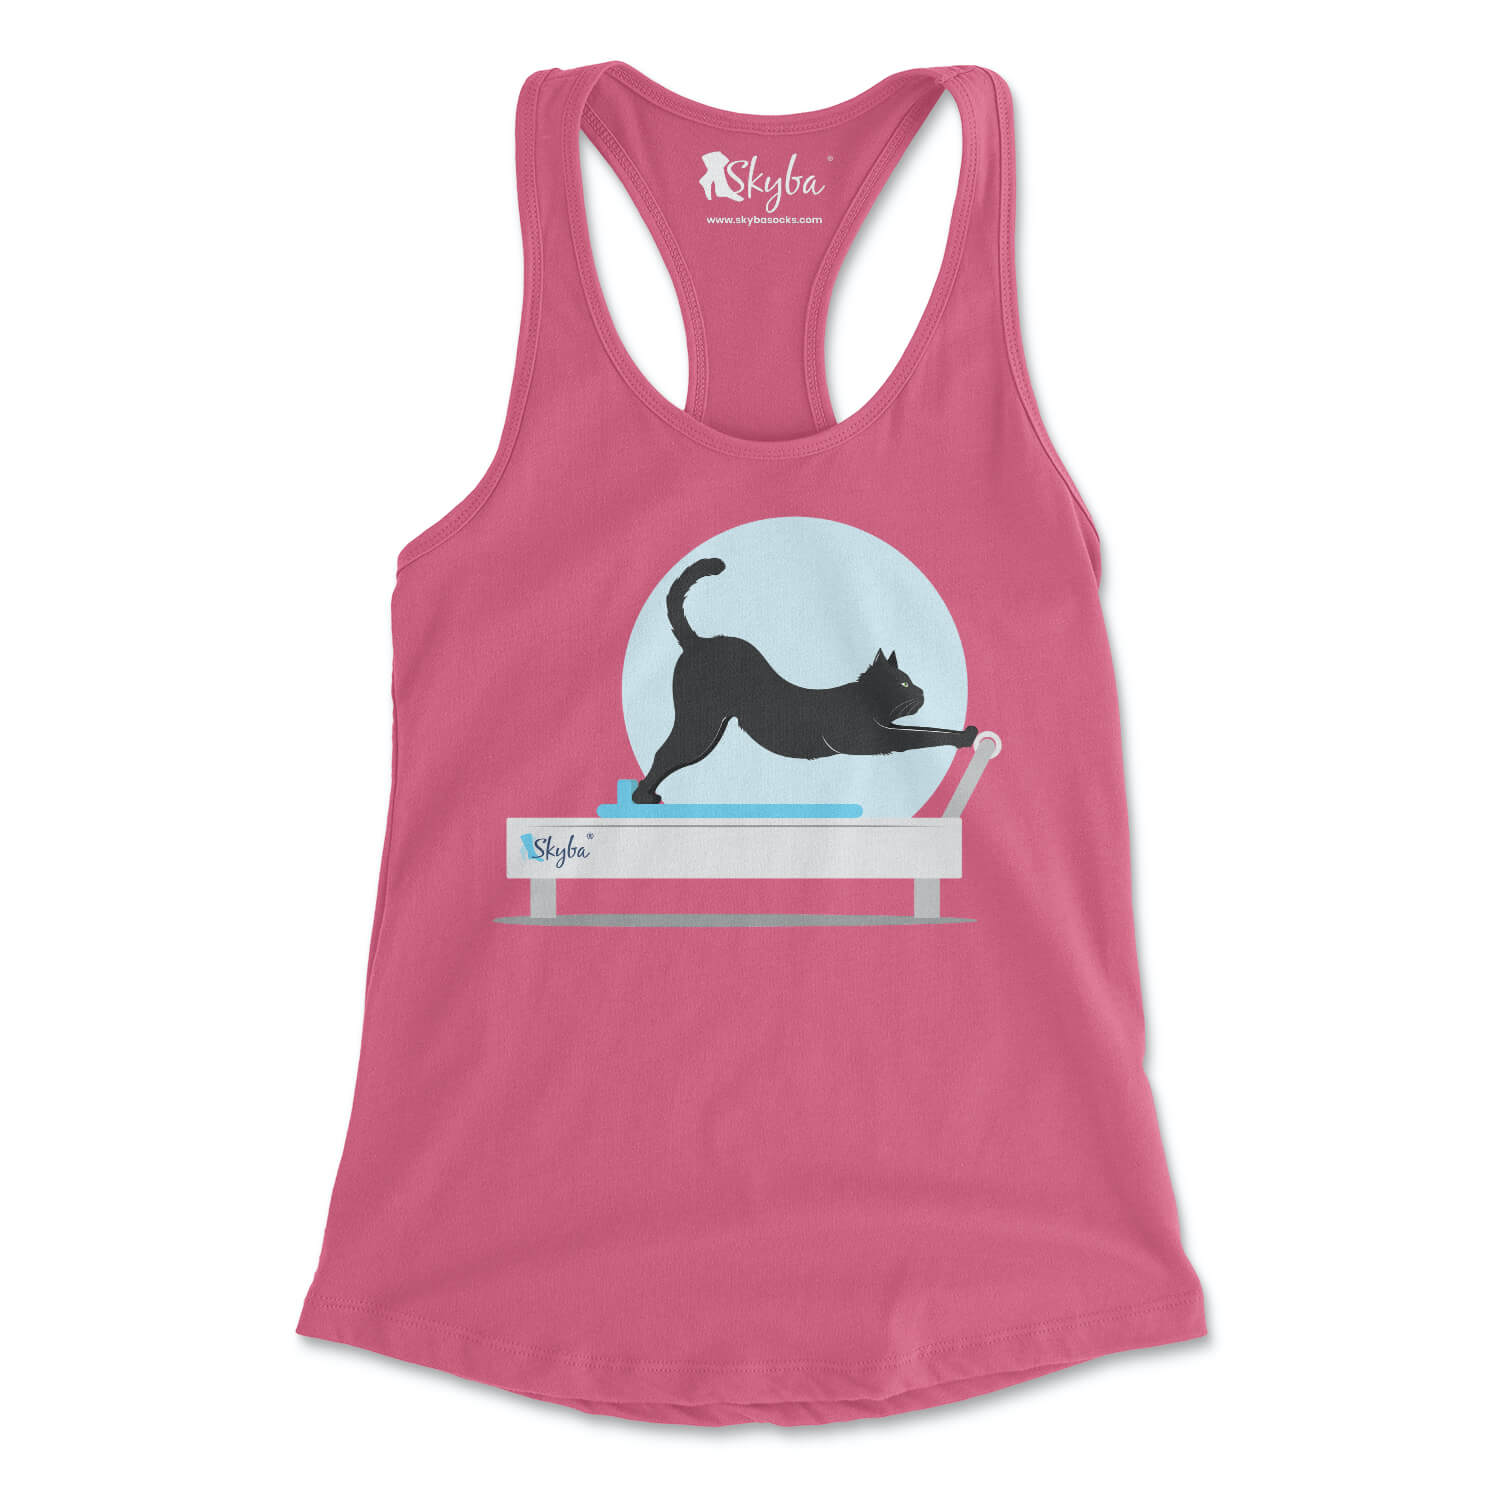 Stretching Cat on Reformer - Women's Slim Fit Tank Skyba Tank Top